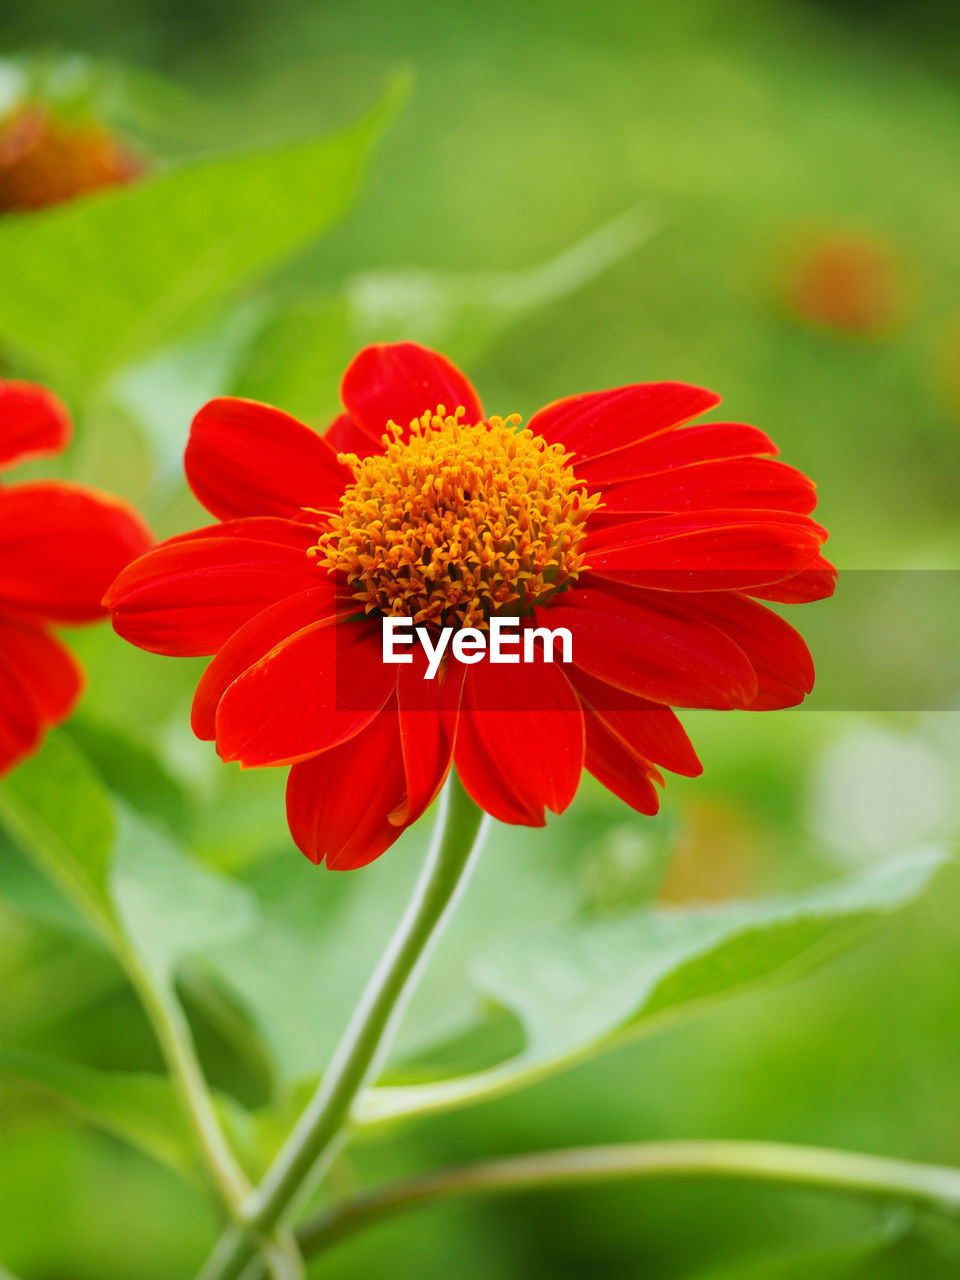 CLOSE-UP OF RED GERBERA DAISY BLOOMING OUTDOORS